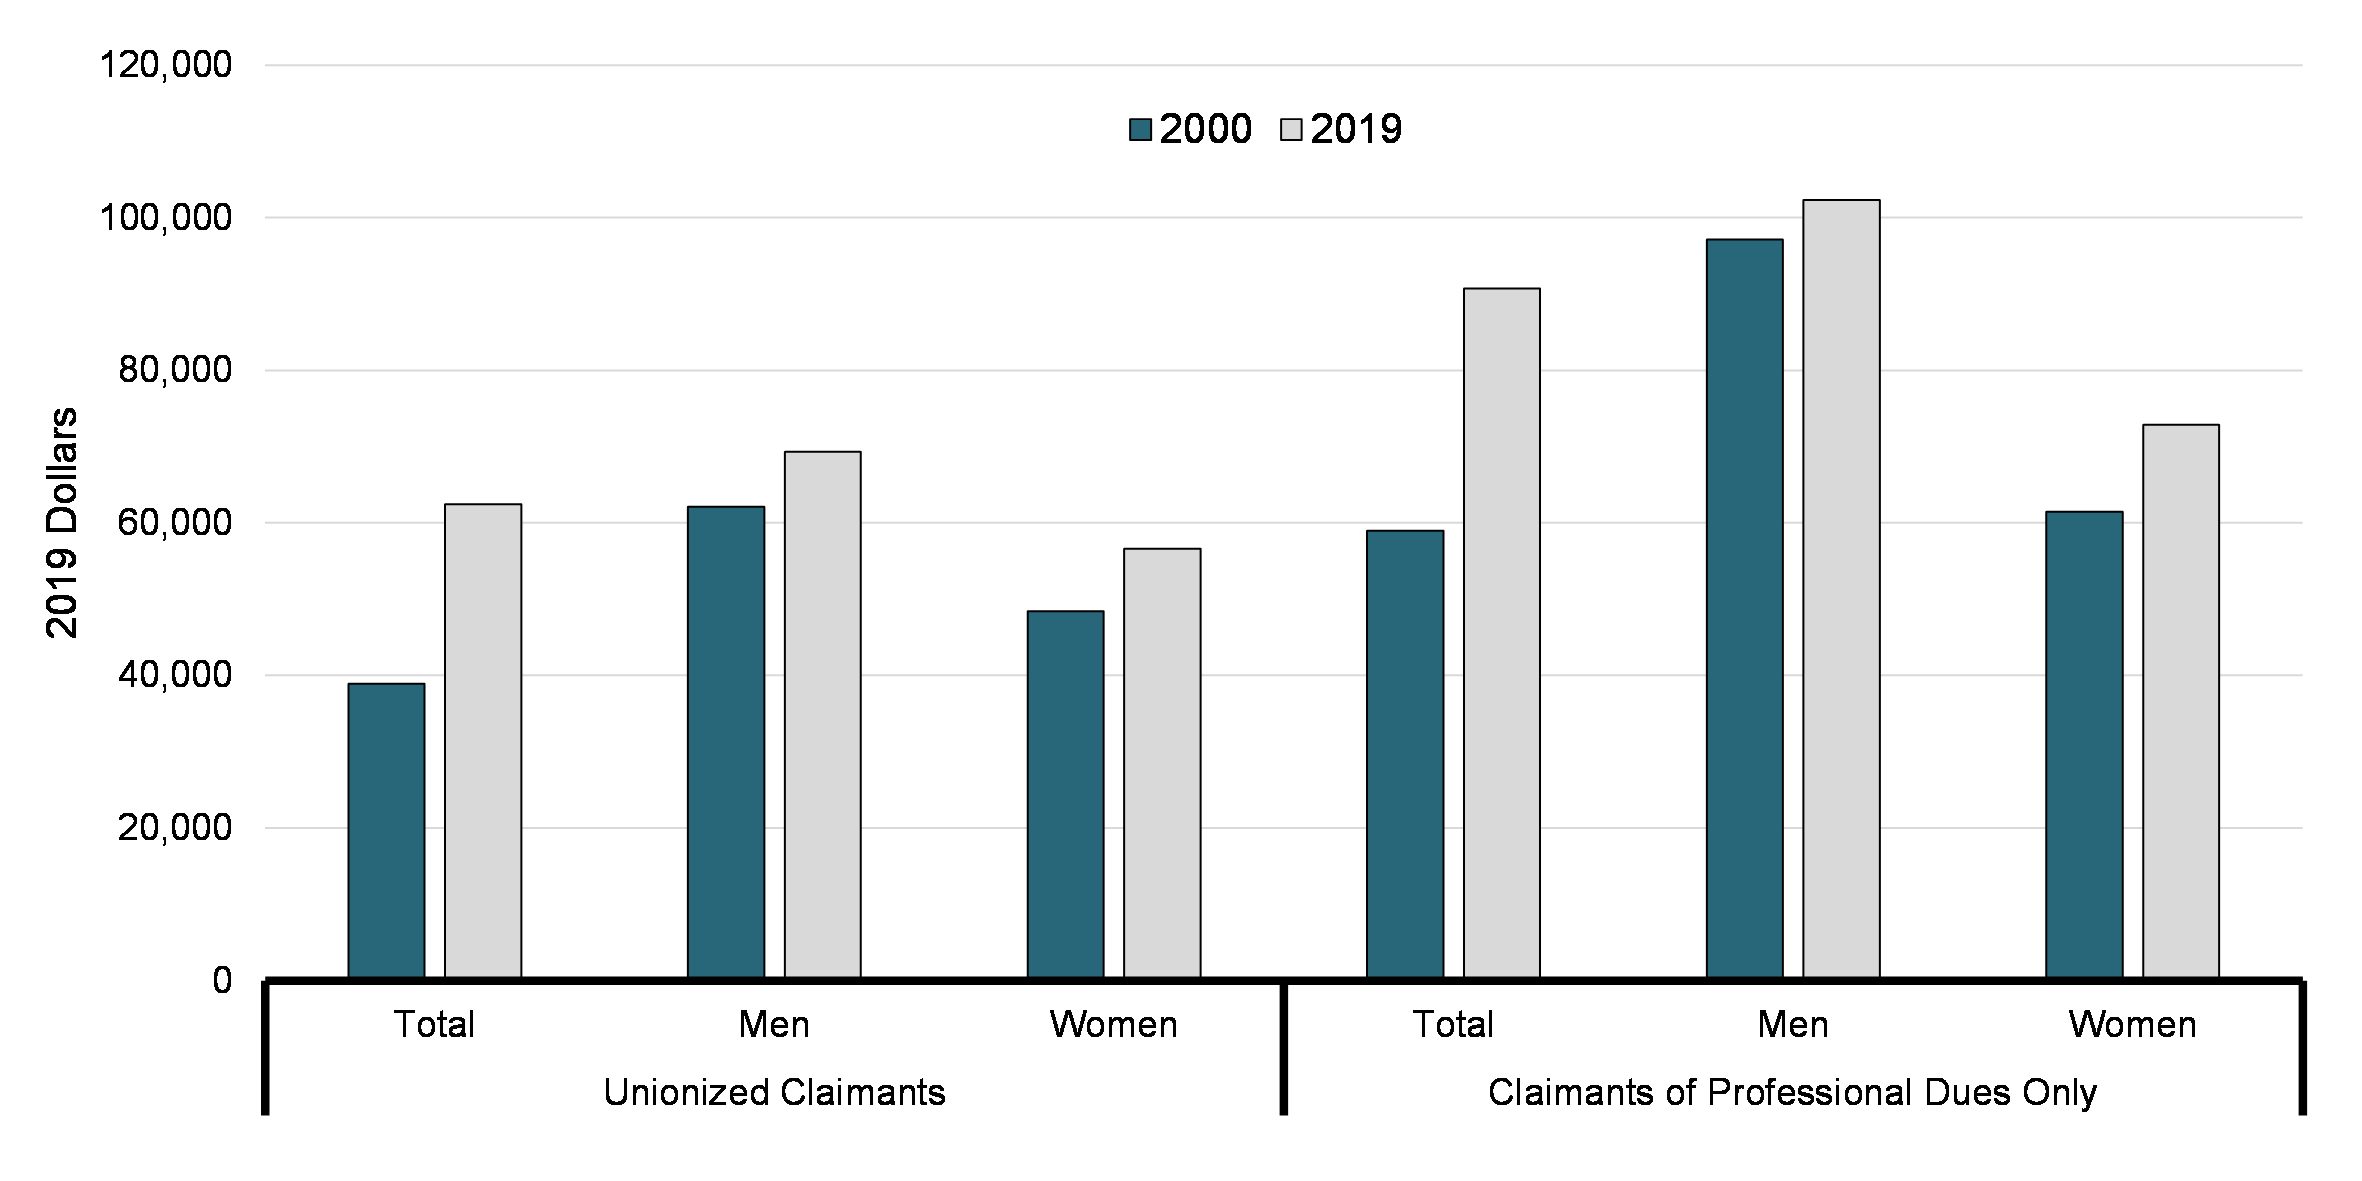 Chart 17: Average Total Income by Gender and Claimant Type (2000 and 2019), in 2019 Dollars